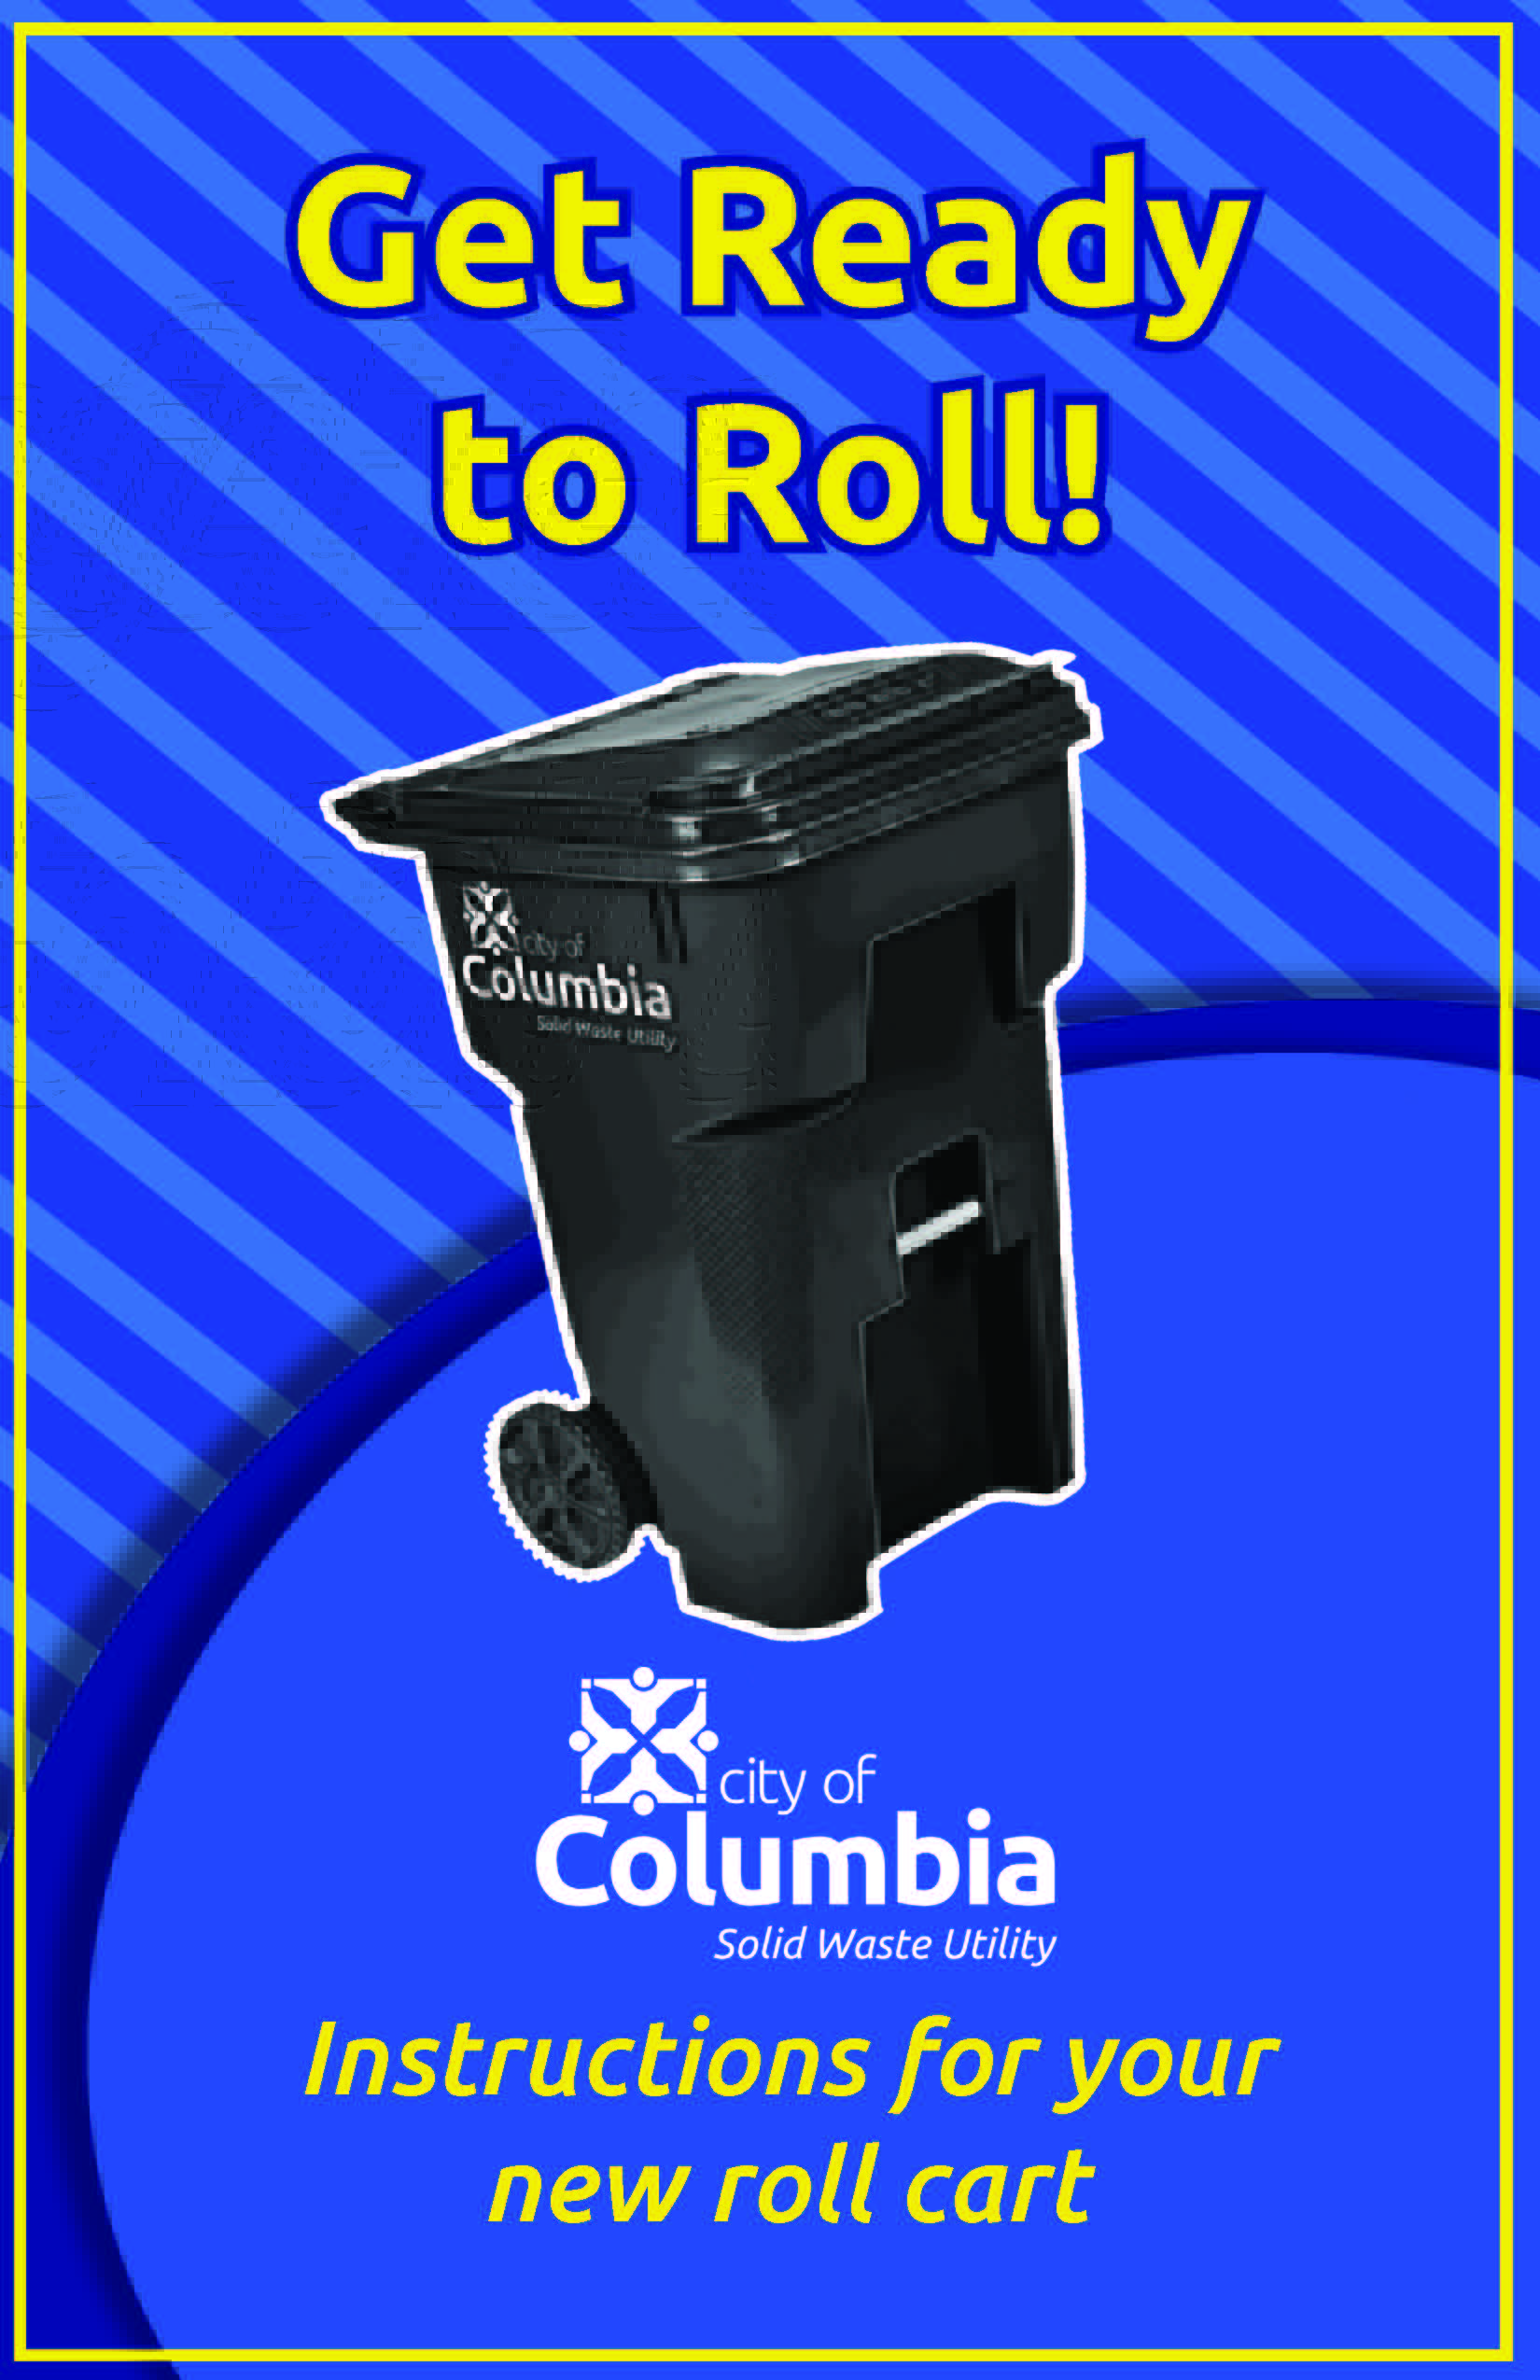 Single Family Home Trash and Recycling - Web Page - City of